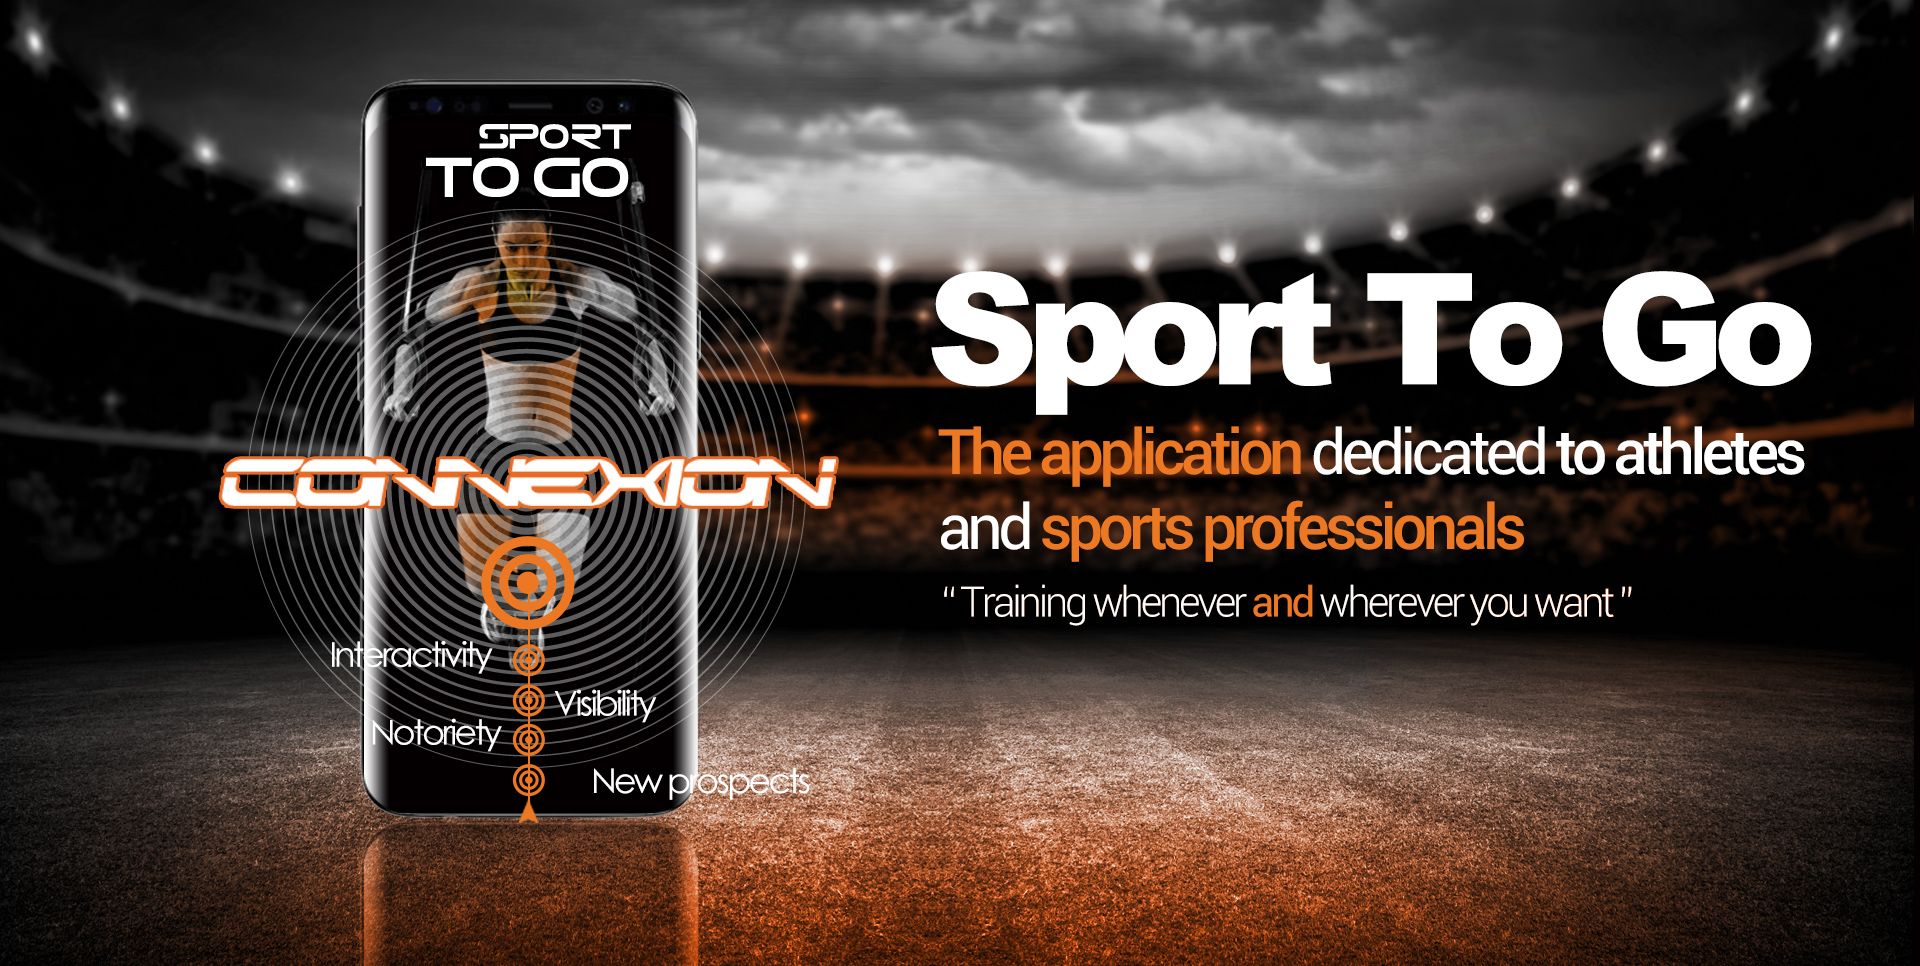 The application dedicated to athletes and sports professionals